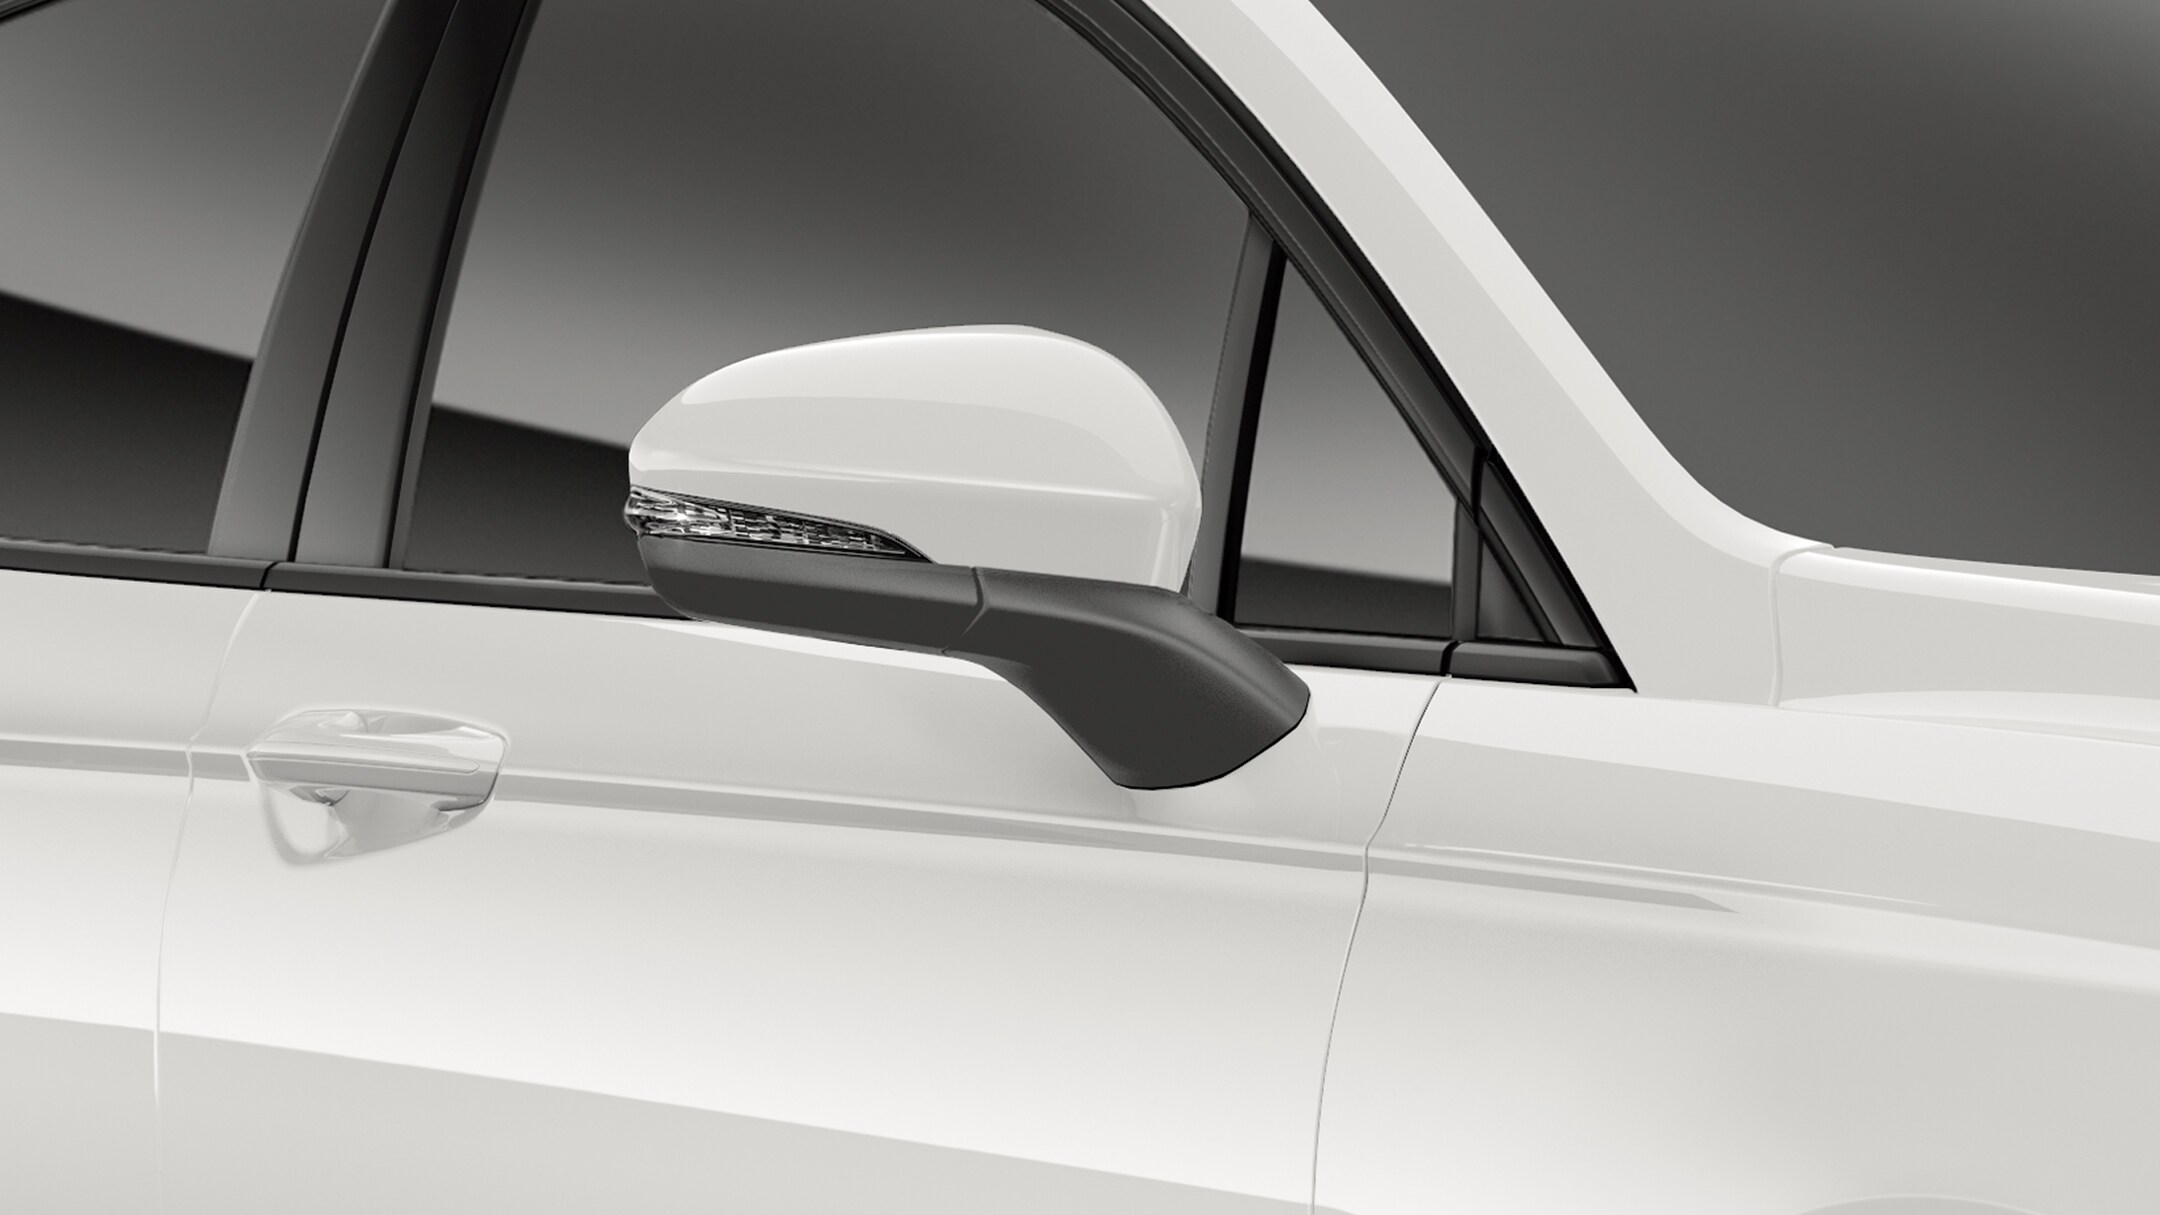 A detail of power-foldable heated side view mirrors on Ford Mondeo